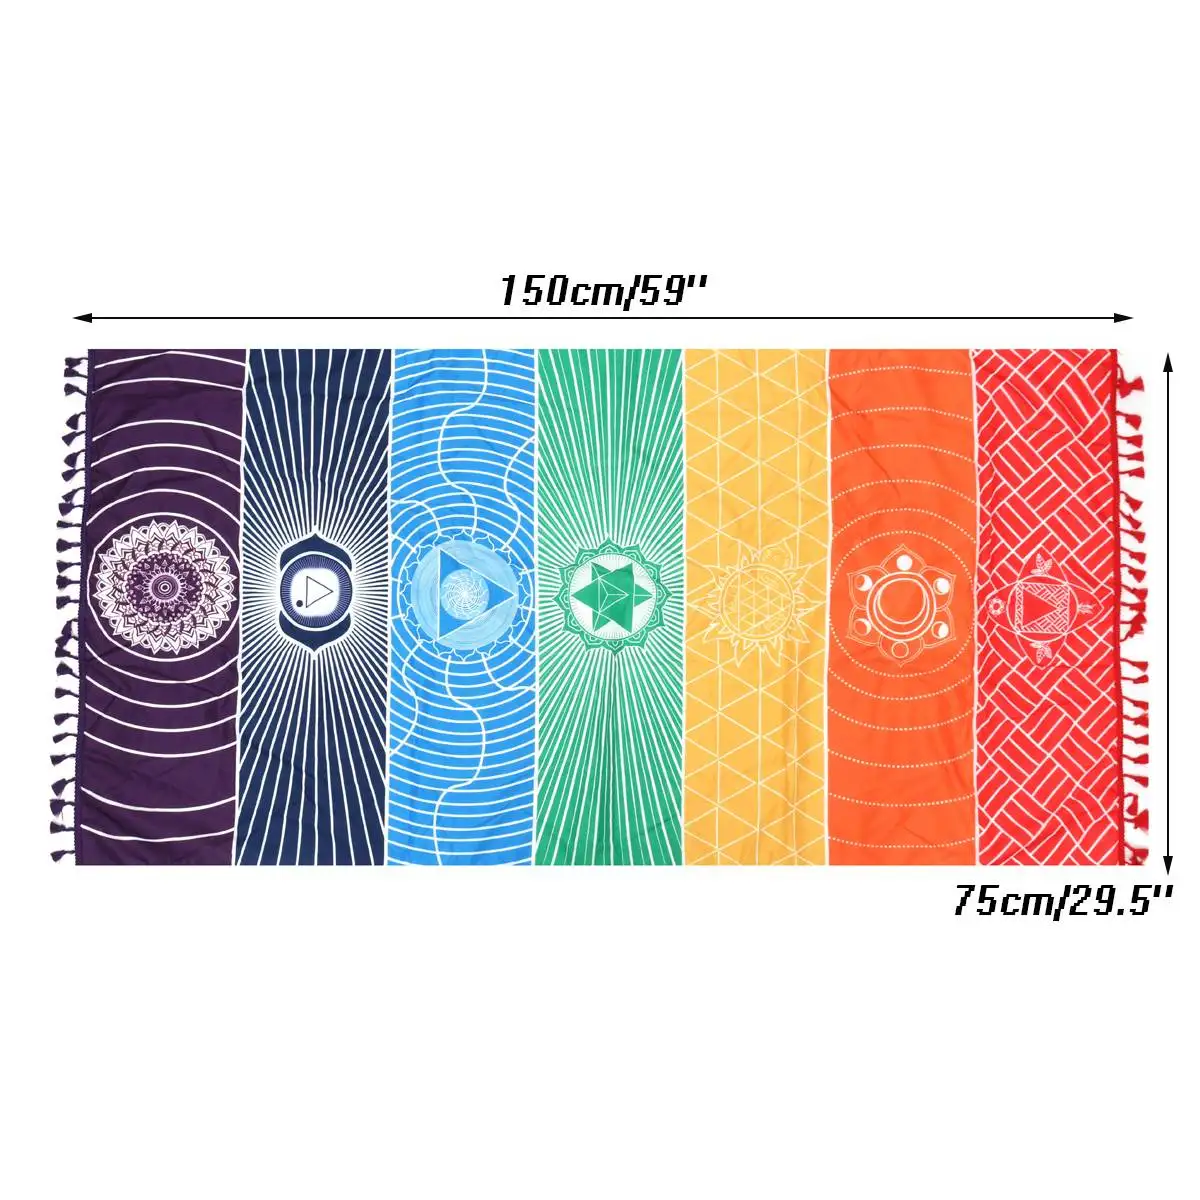 

Indian Wall Decor Hippie Tapestries Boho Psychedelic Mandala Tapestry Wall Hanging Sheet Cotton Throw Bed Bedspread